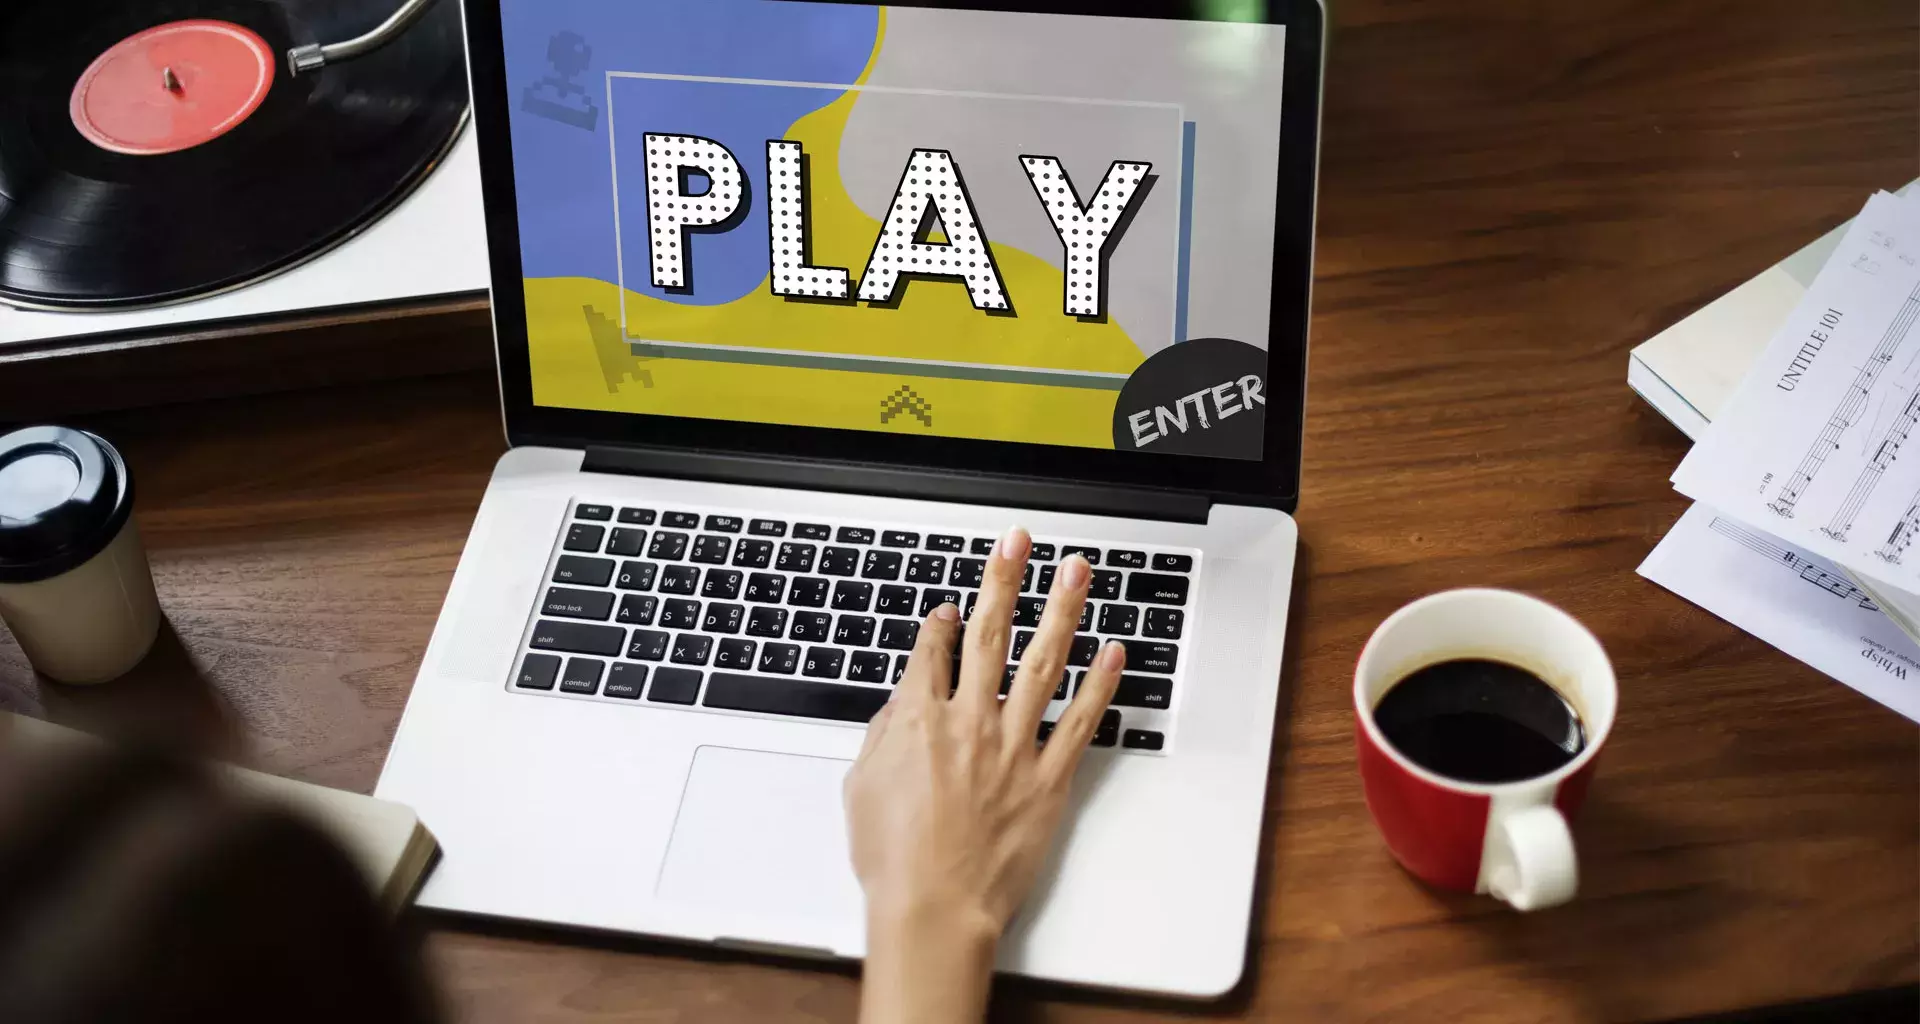 Playing and learning! Here’s how gamification can motivate students